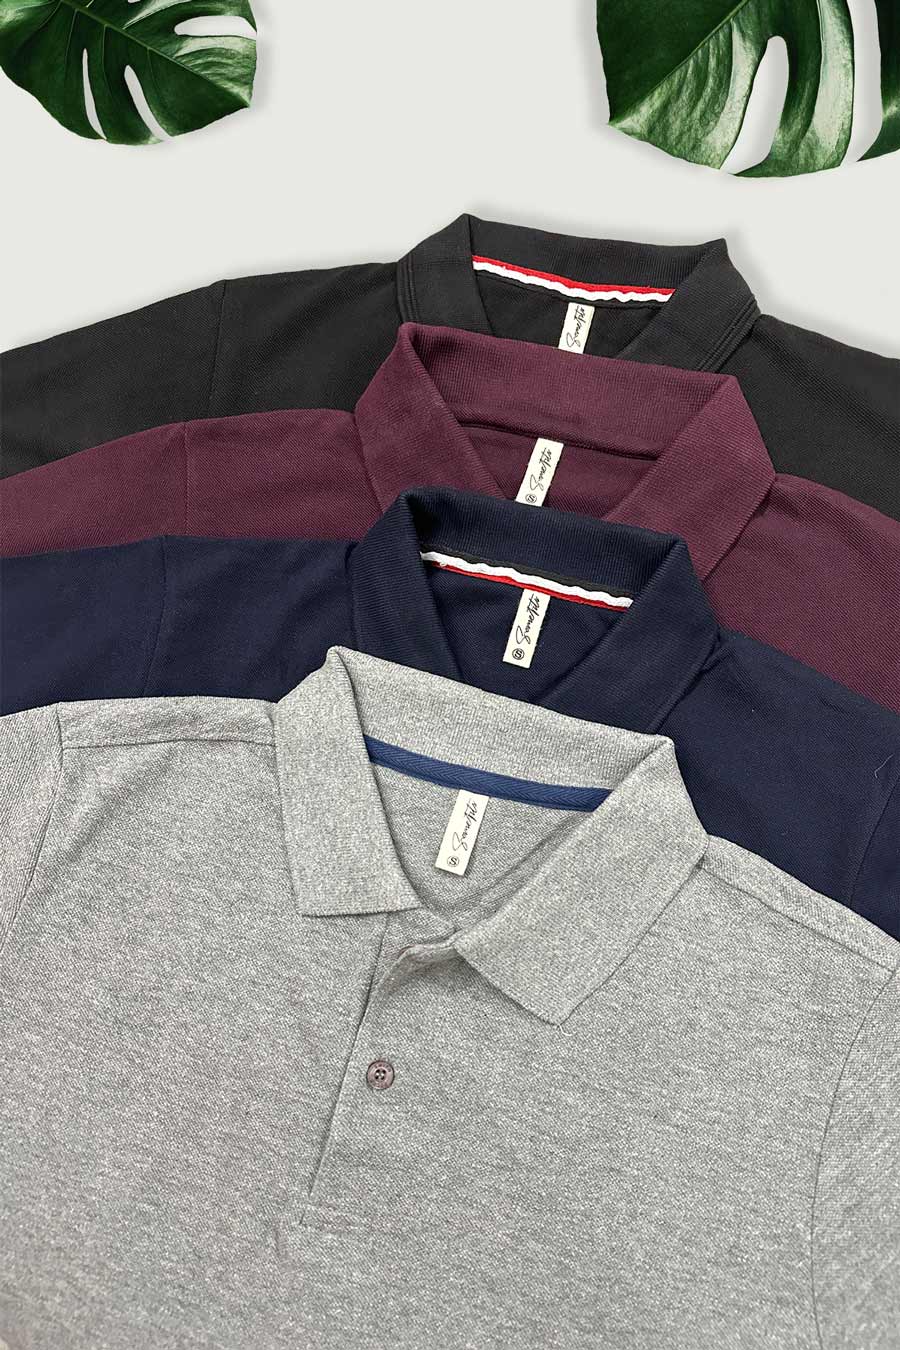 Pack 4 - Grey, Wine, Black & Navy - Classic Polo